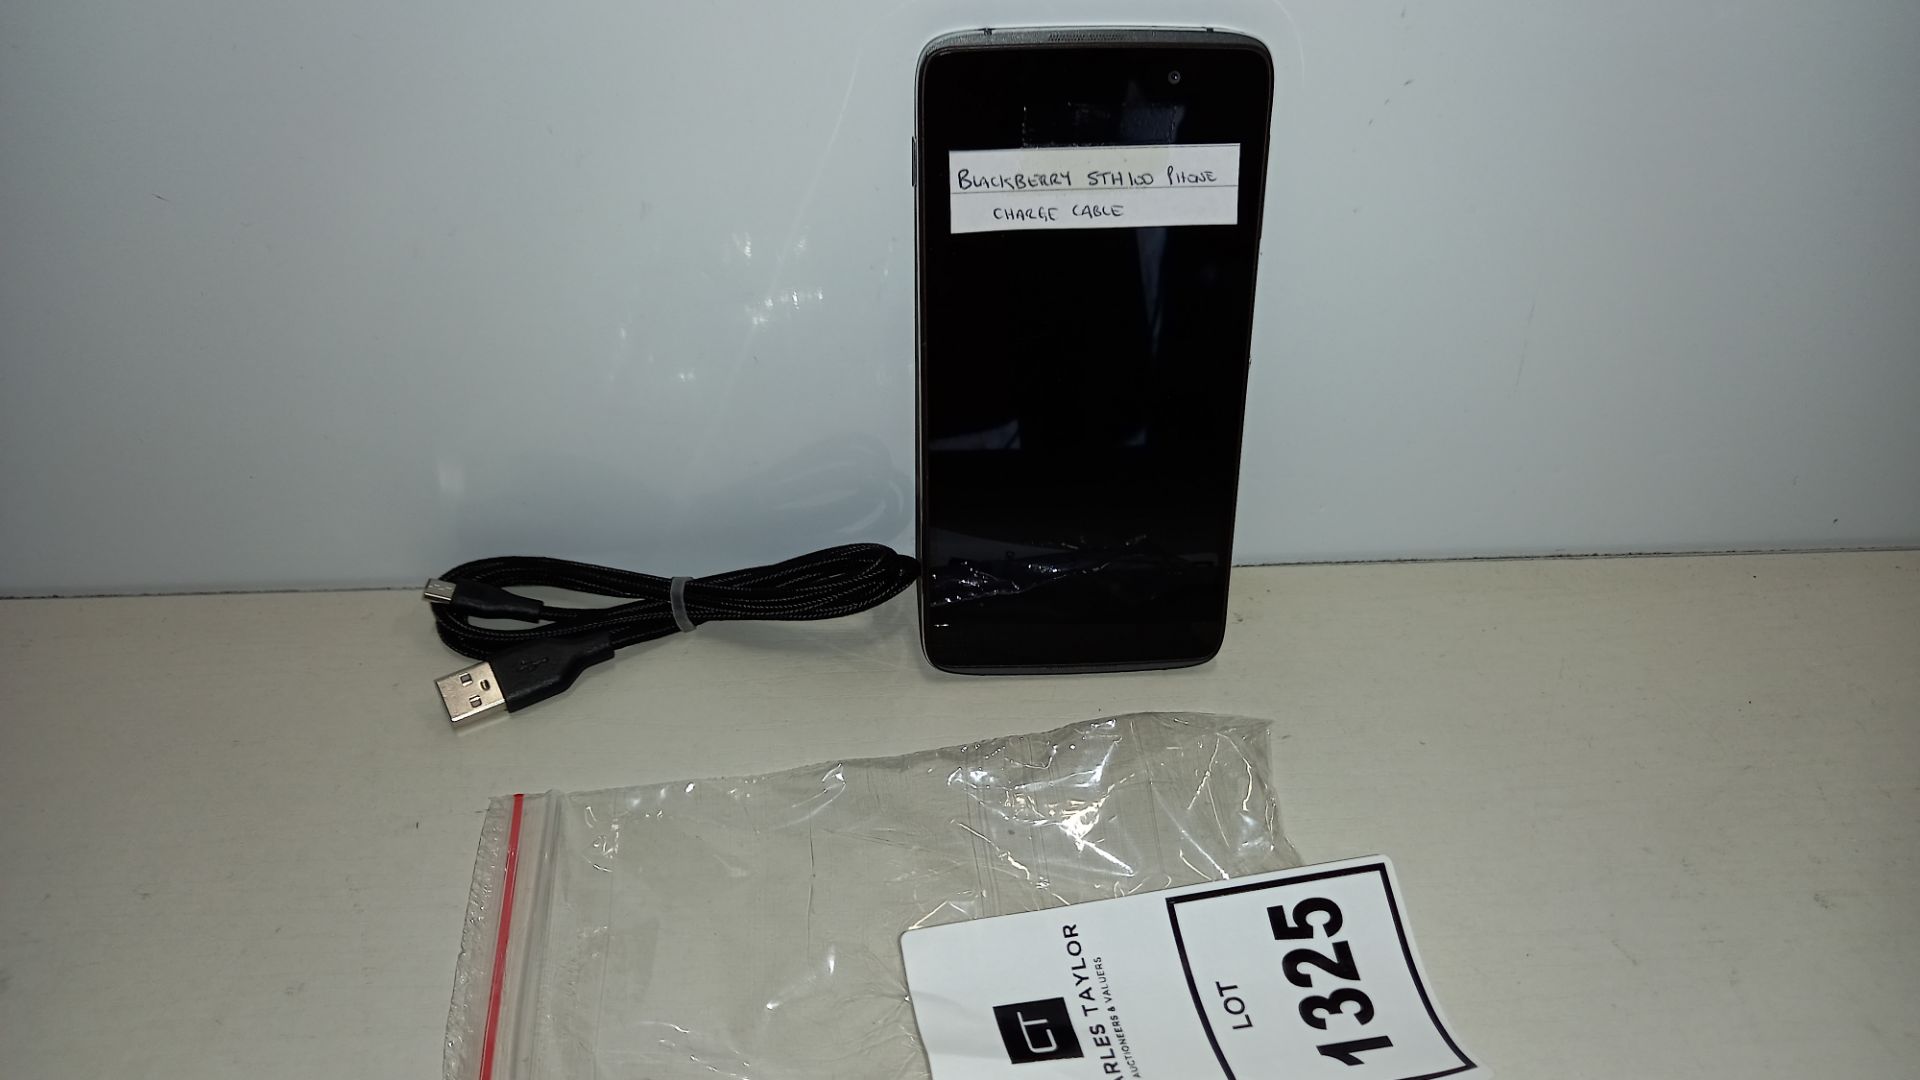 BLACKBERRY STH100 PHONE - WITH CHARGING CABLE